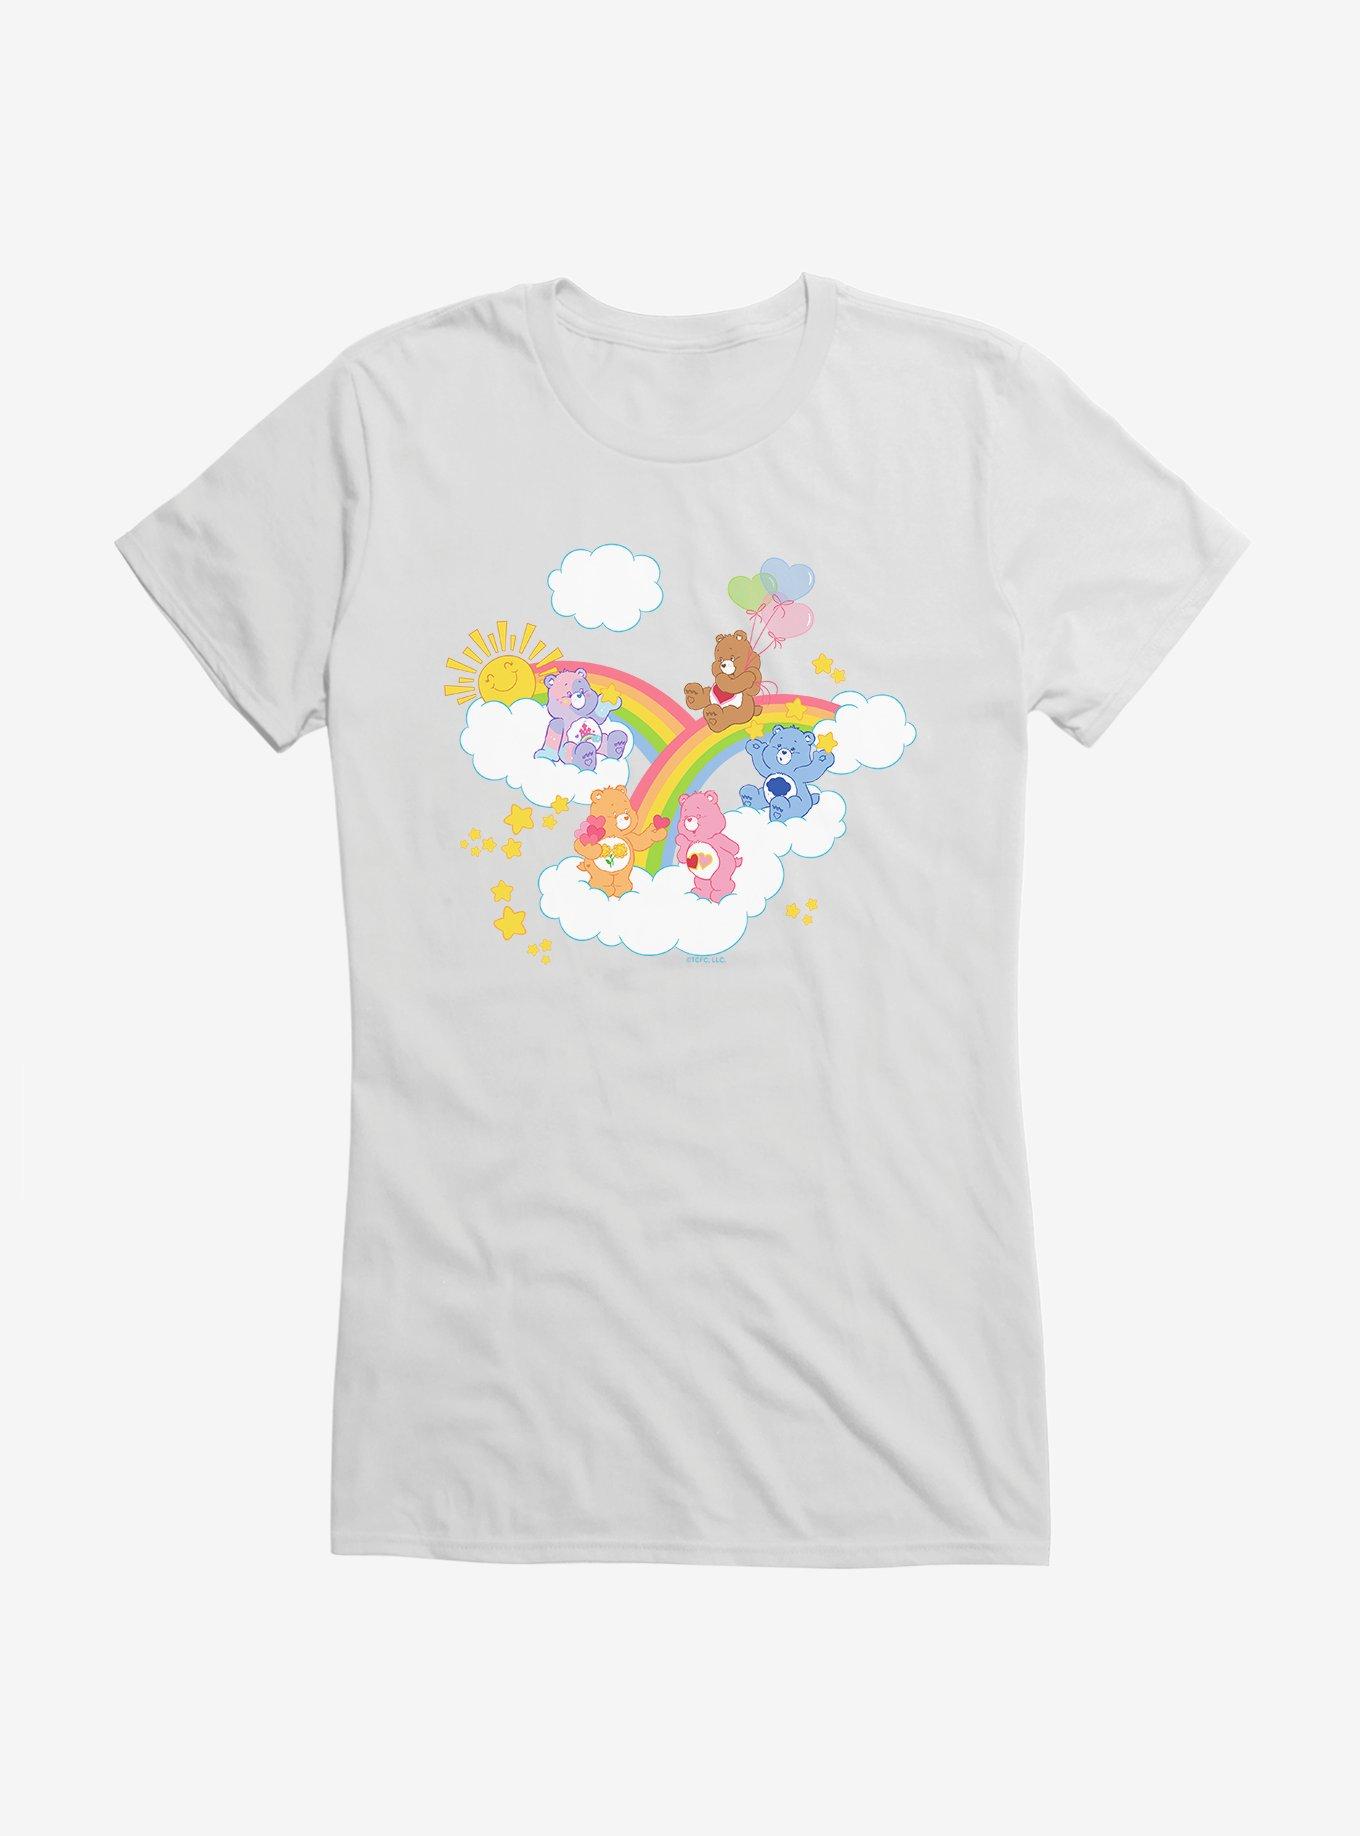 Care Bears Over The Rainbow Girls T-Shirt, WHITE, hi-res